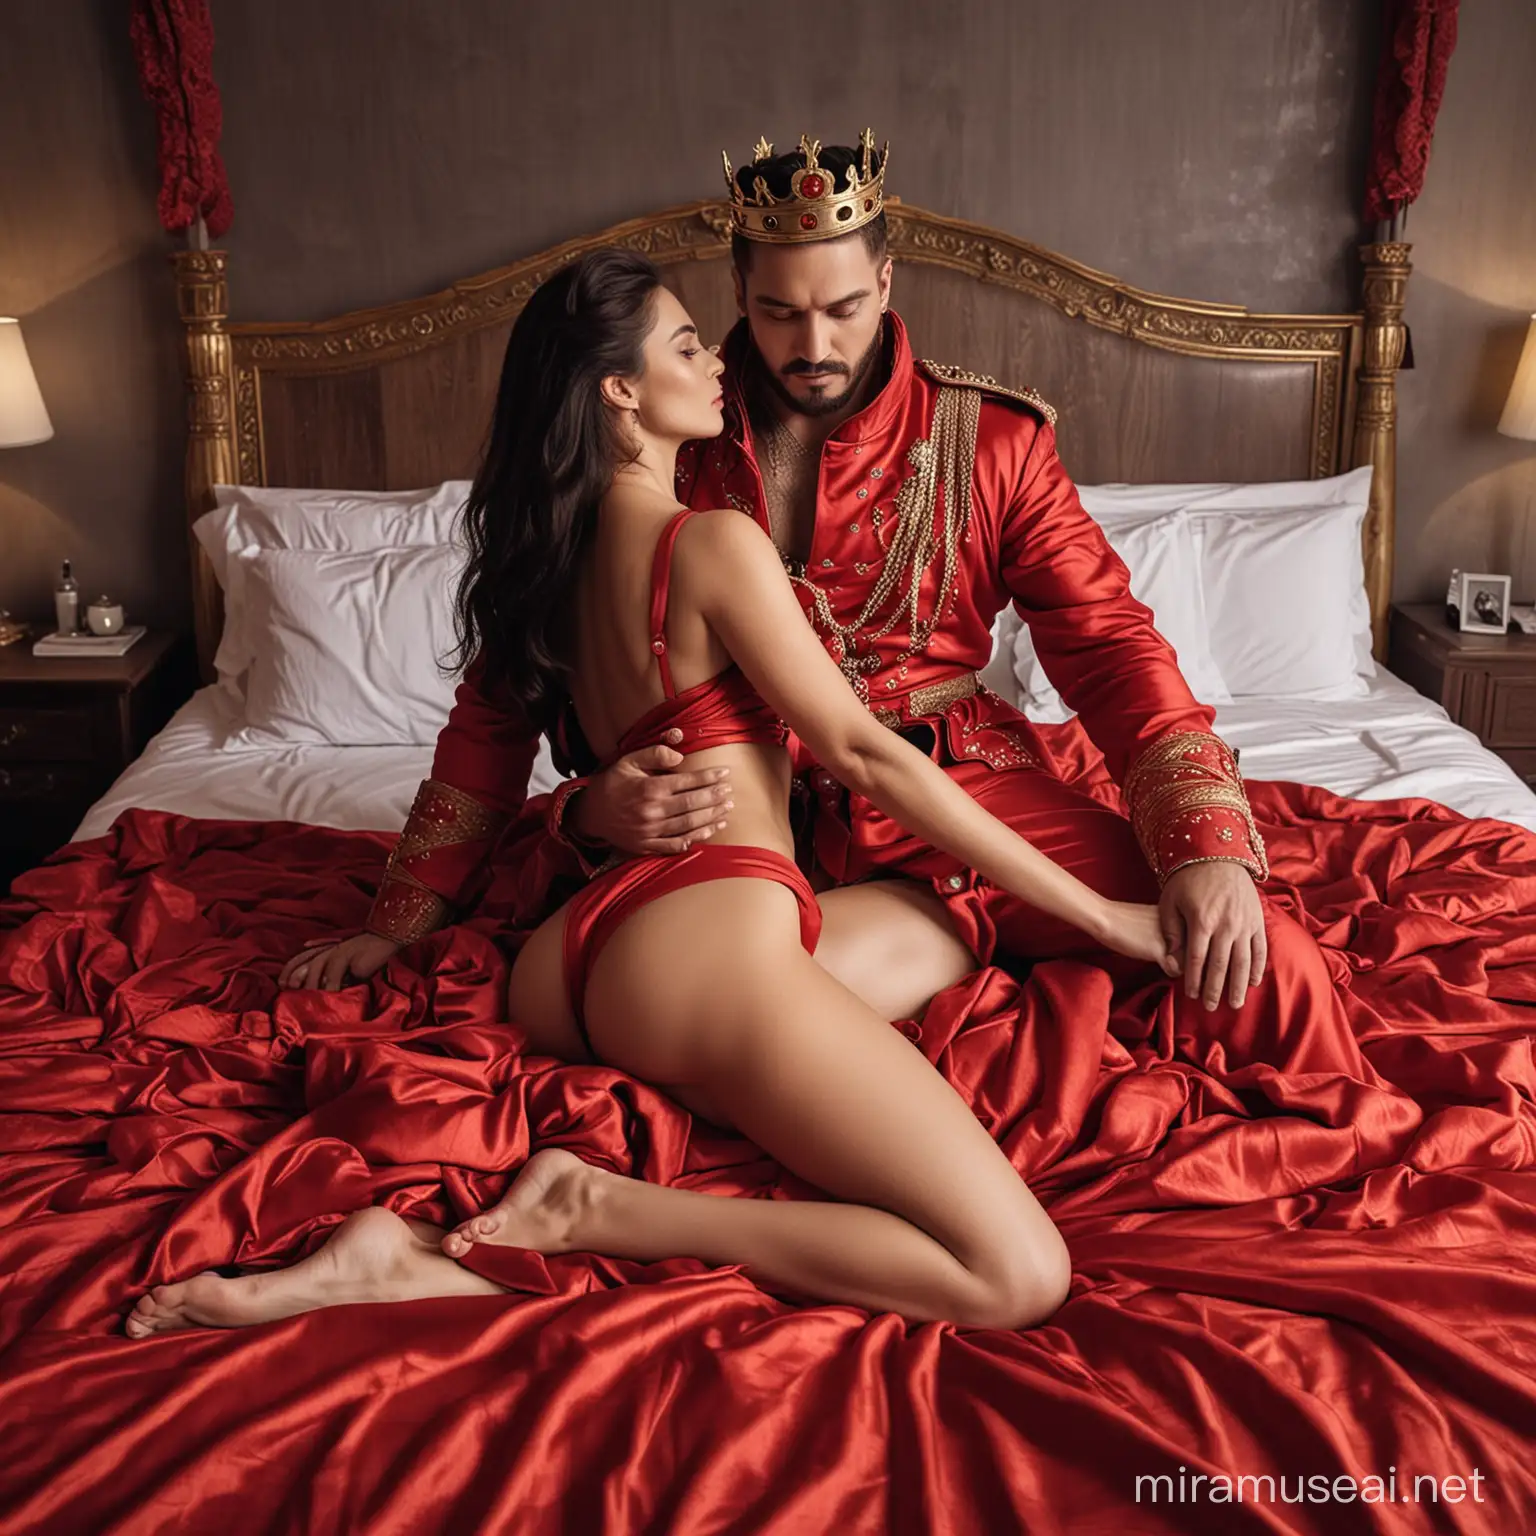 Warrior King and Elegant Woman in Red Engaging in Intimate Moment